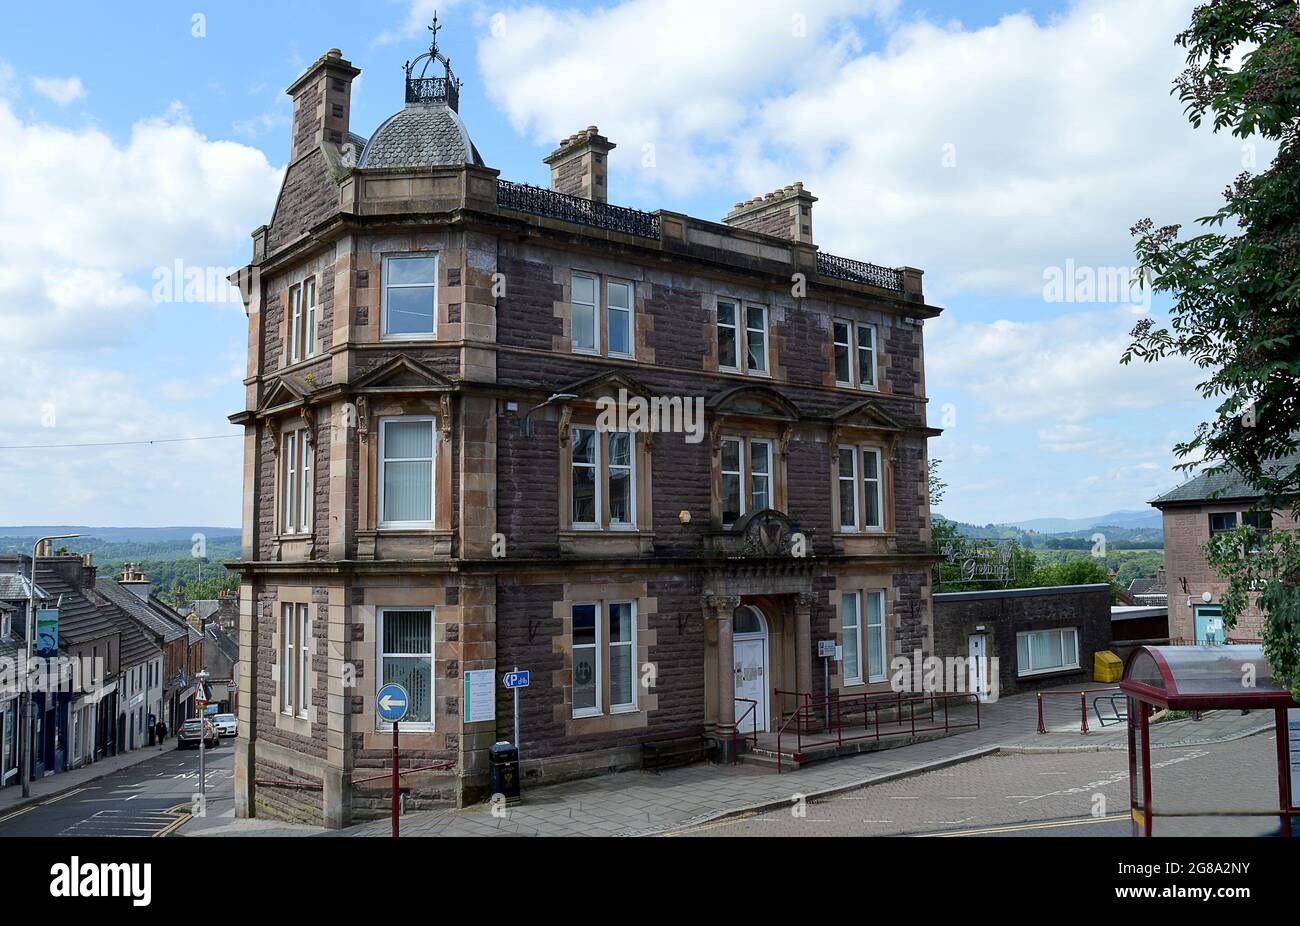 CRIEFF, PERTHSHIRE, SCOTLAND - 21 JUNE 2021: Former Town Hall then Burgh Chambers located in James Square in the centre of he town and built ca1850. Stock Photo